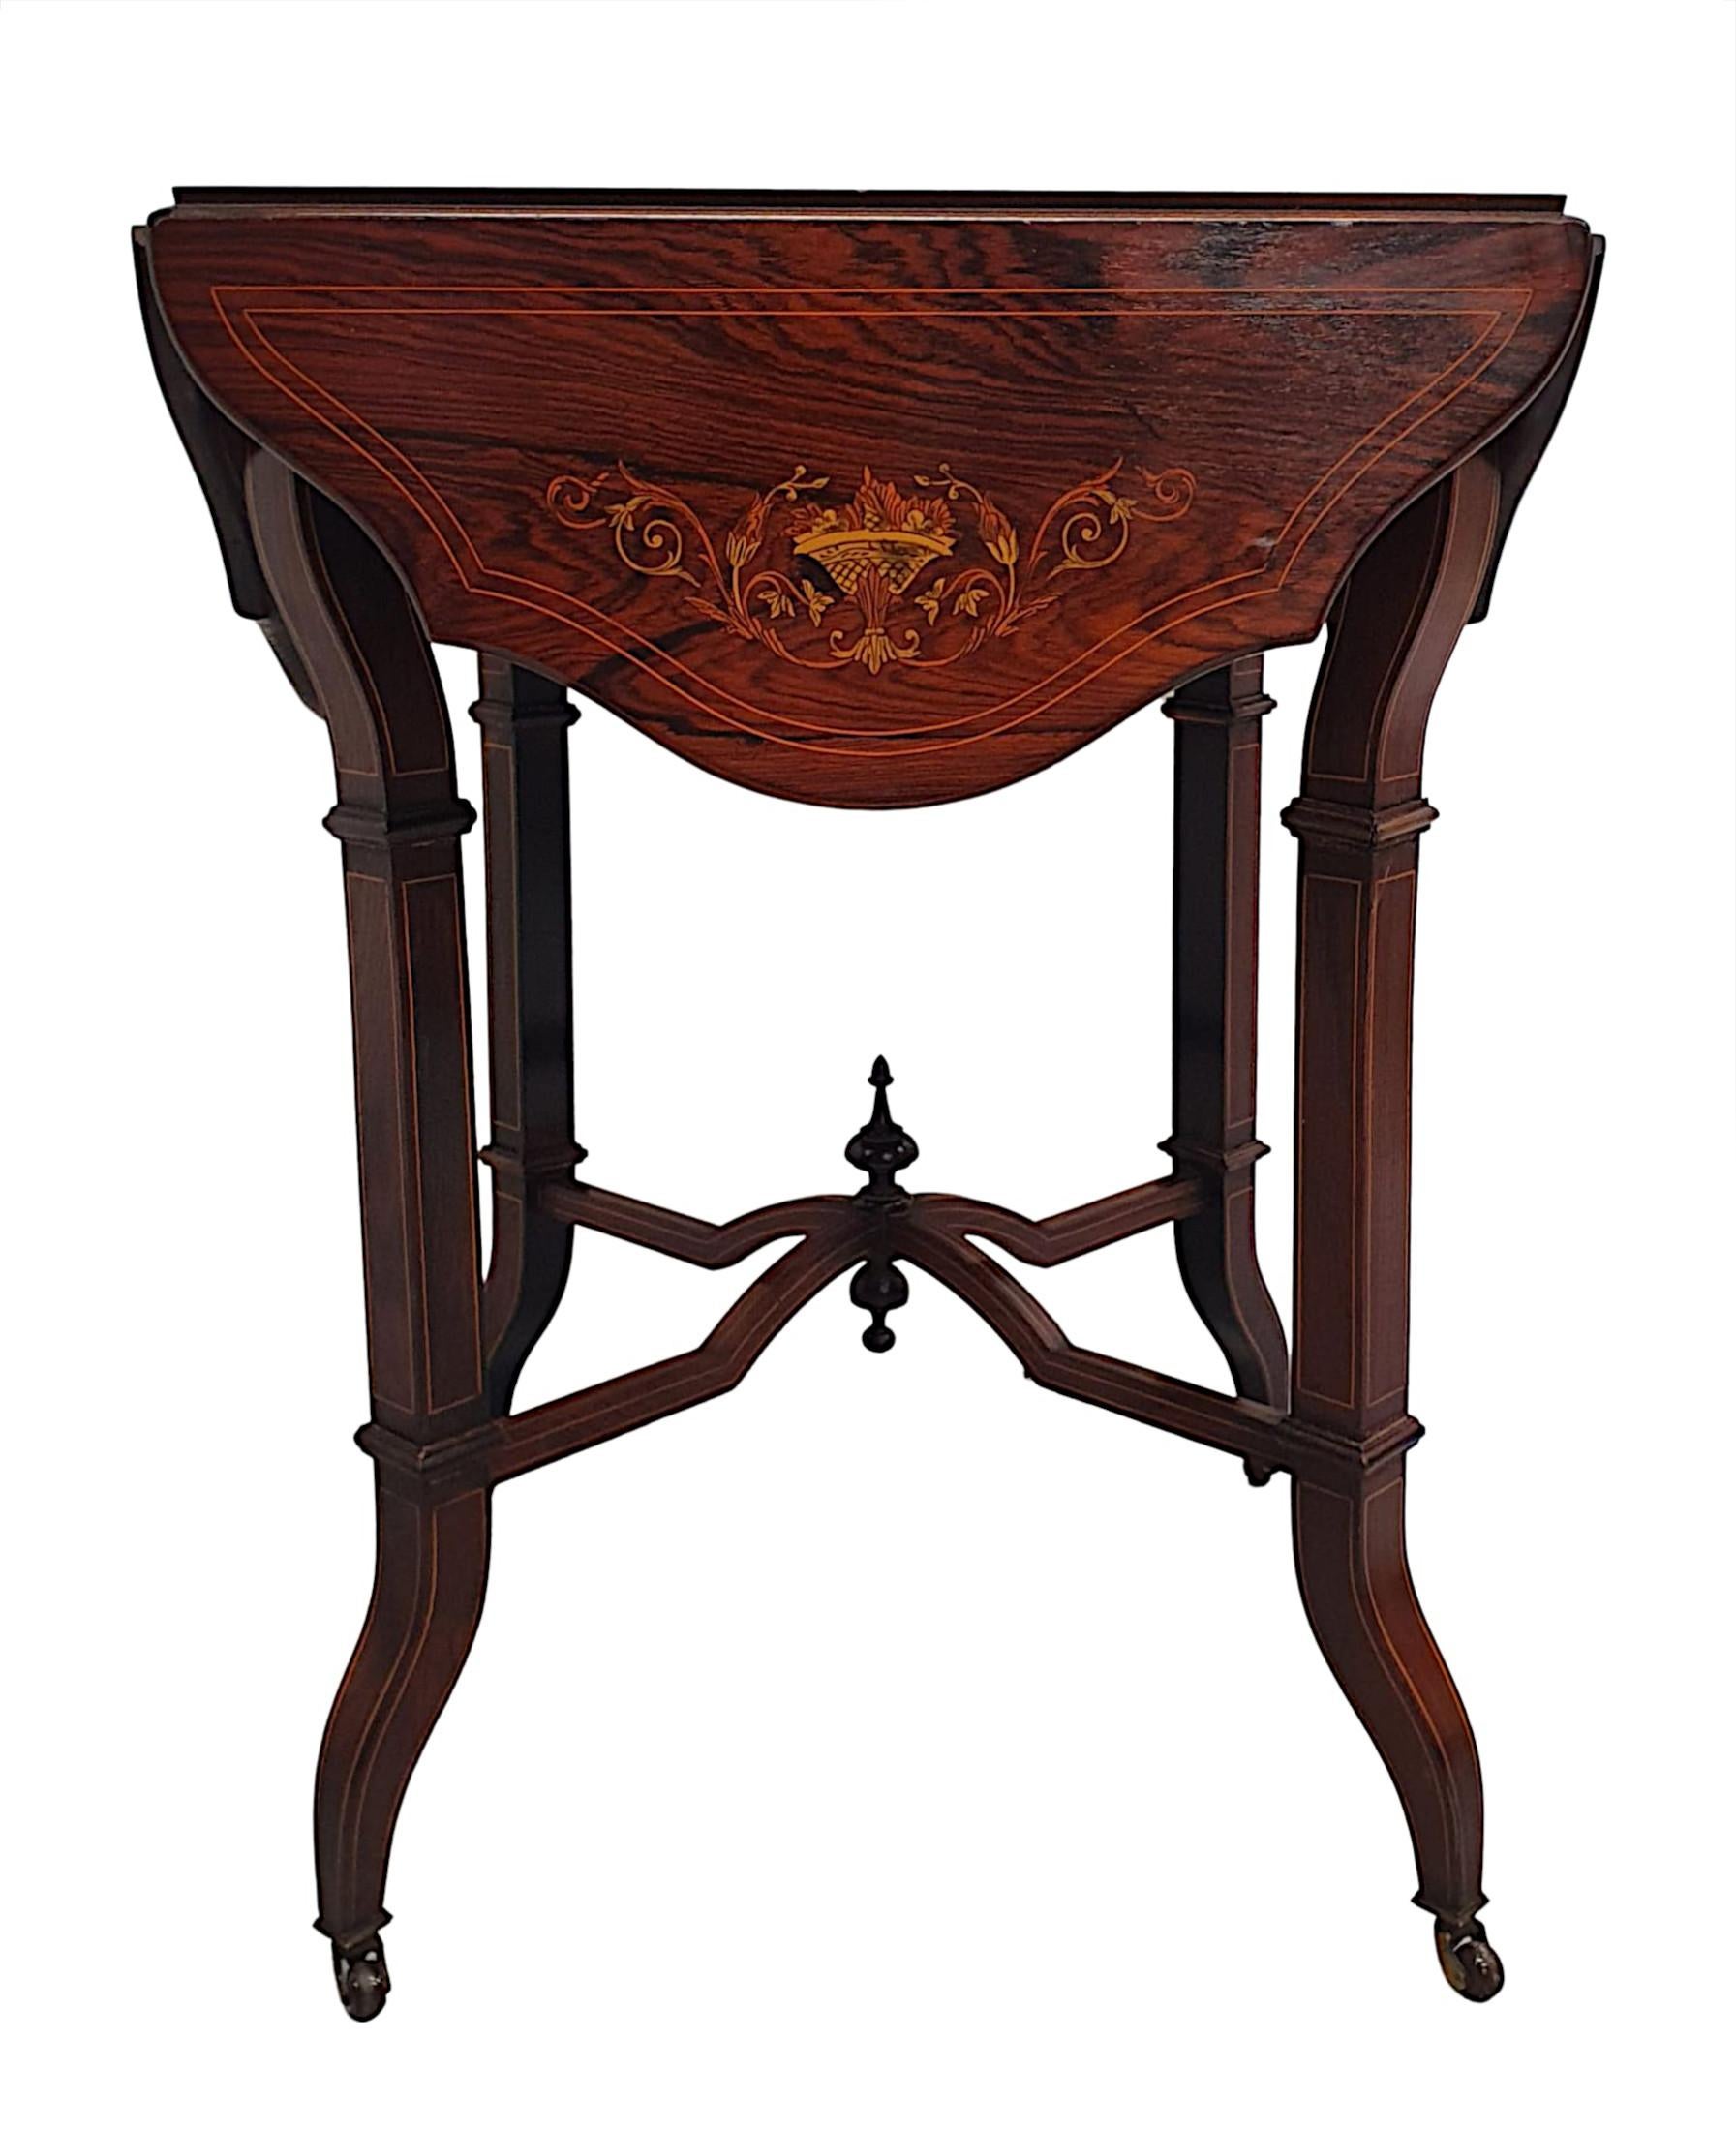 A gorgeous quality late 19th century fruitwood drop leaf lamp or occasional table, line inlaid, richly patinated and with beautiful marquetry panel detail throughout. The moulded top with four drop leaf serpentine, shaped leaves, all with intricate